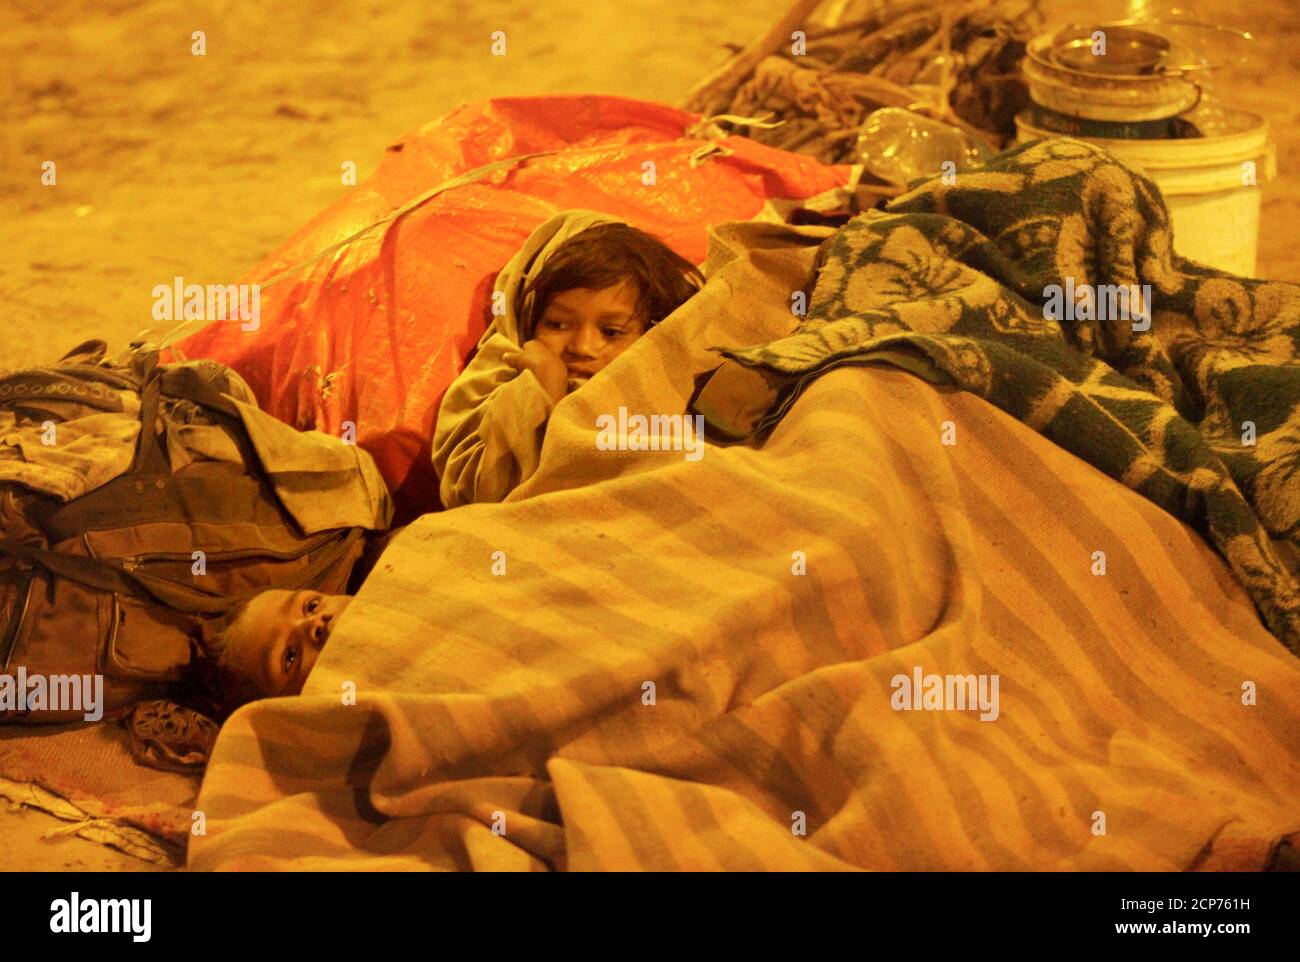 Homeless children use blankets to protect themselves from the cold under a flyover in New Delhi January 21, 2010. The Supreme Court chided the Delhi government to provide night shelters with blankets, water and mobile toilets to all homeless in the capital, local media reported. REUTERS/Reinhard Krause (INDIA - Tags: SOCIETY ENVIRONMENT) Stock Photo